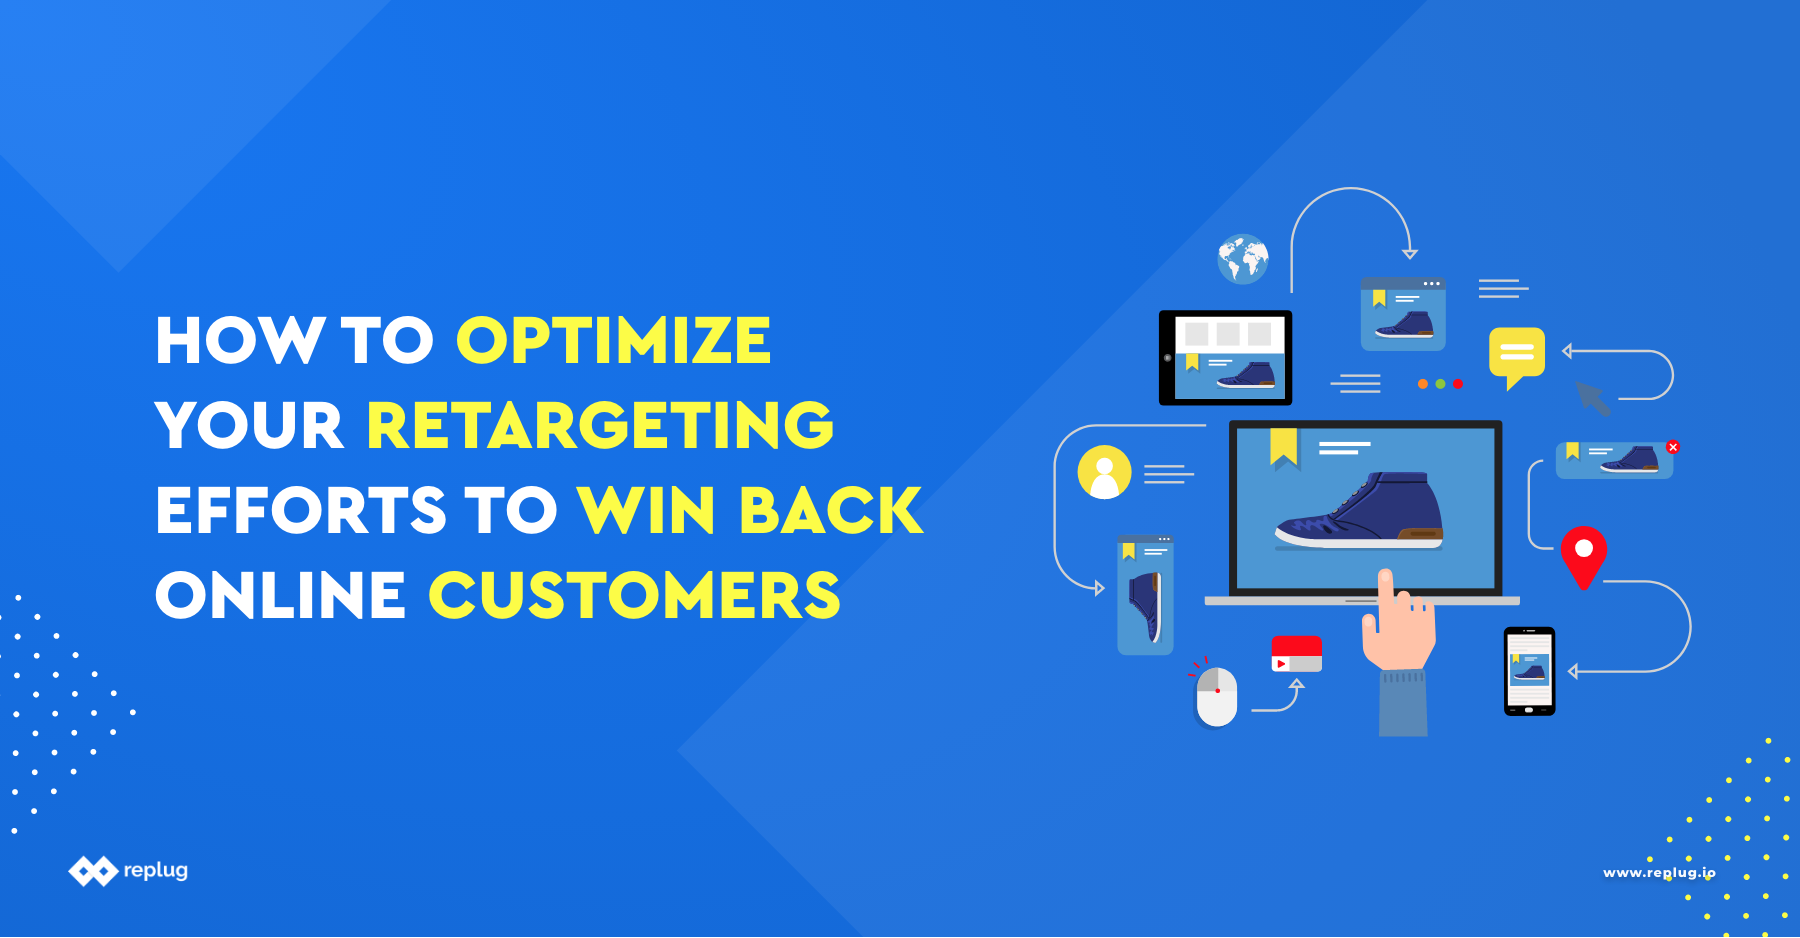 How To Optimize Your Retargeting Efforts To Win Back Online Customers